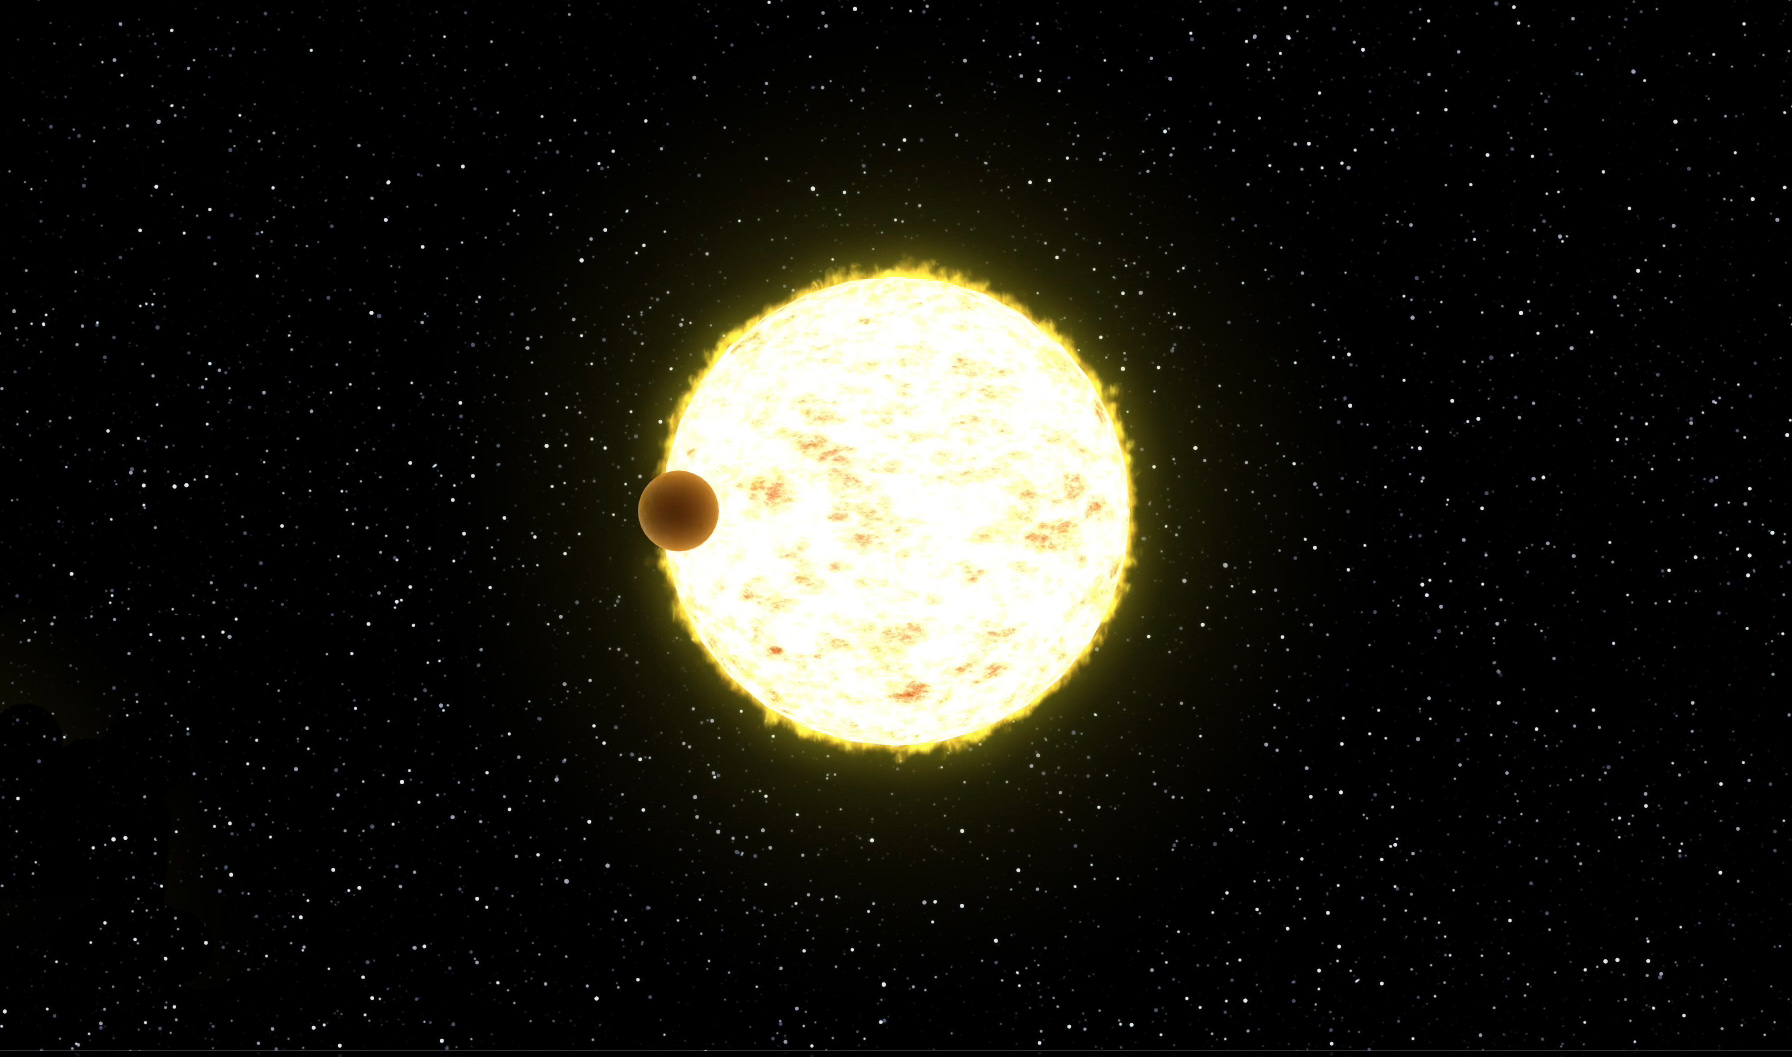 A small brown planet is seen in silhouette crossing in front of a glowing pale yellow star. The background is black with tiny white stars speckled all over.